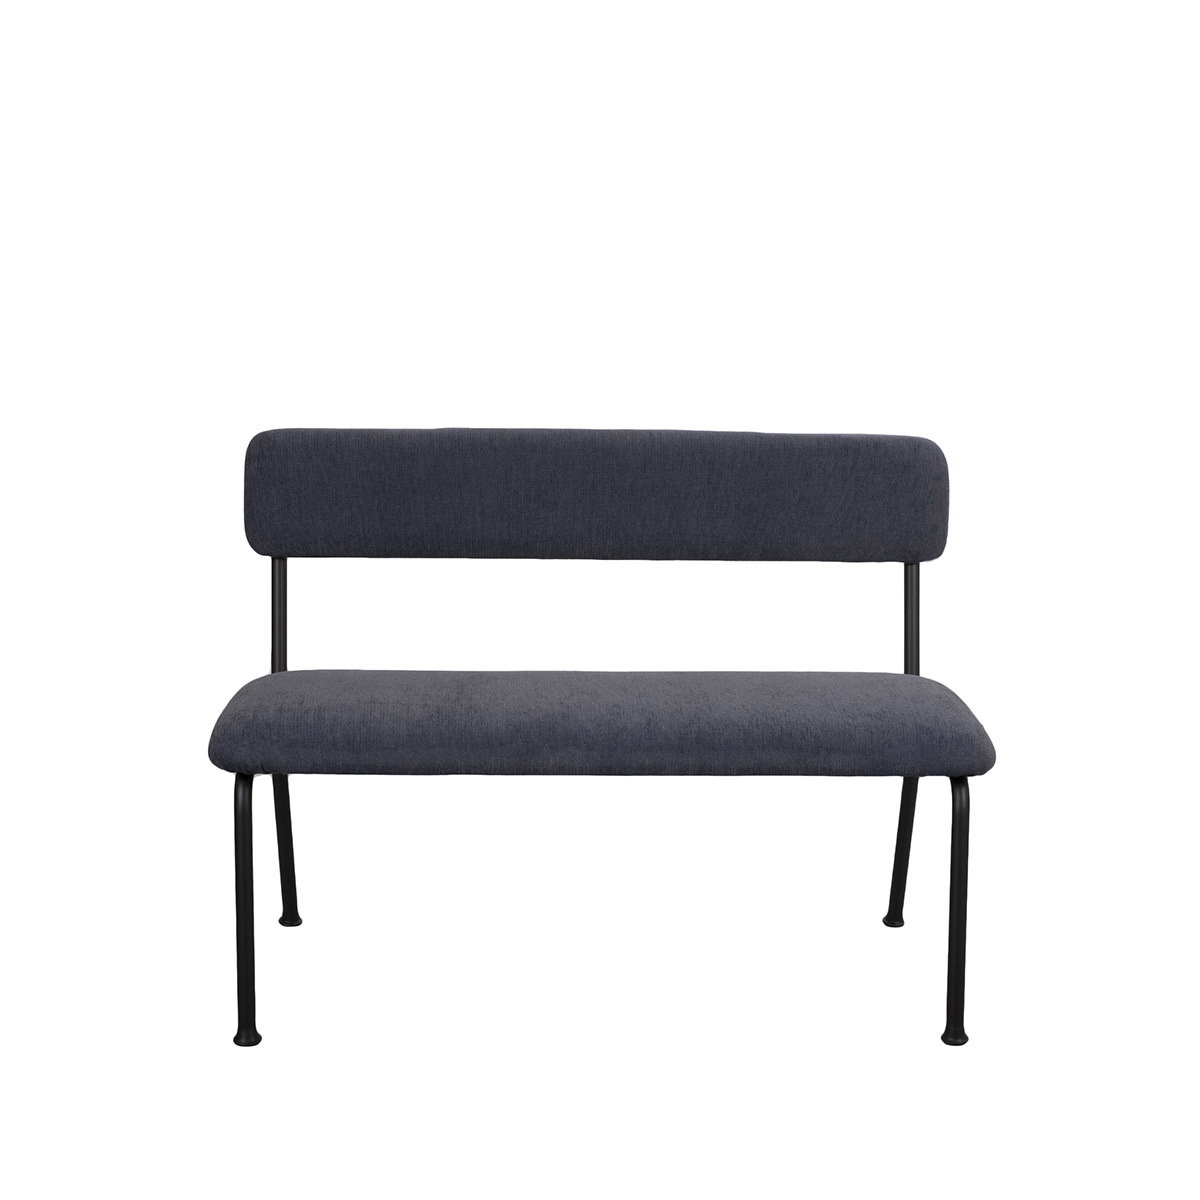 Bench Le Tube, Midnight Blue - L63 x W25 x H33 in - Steel / Linen - image 13